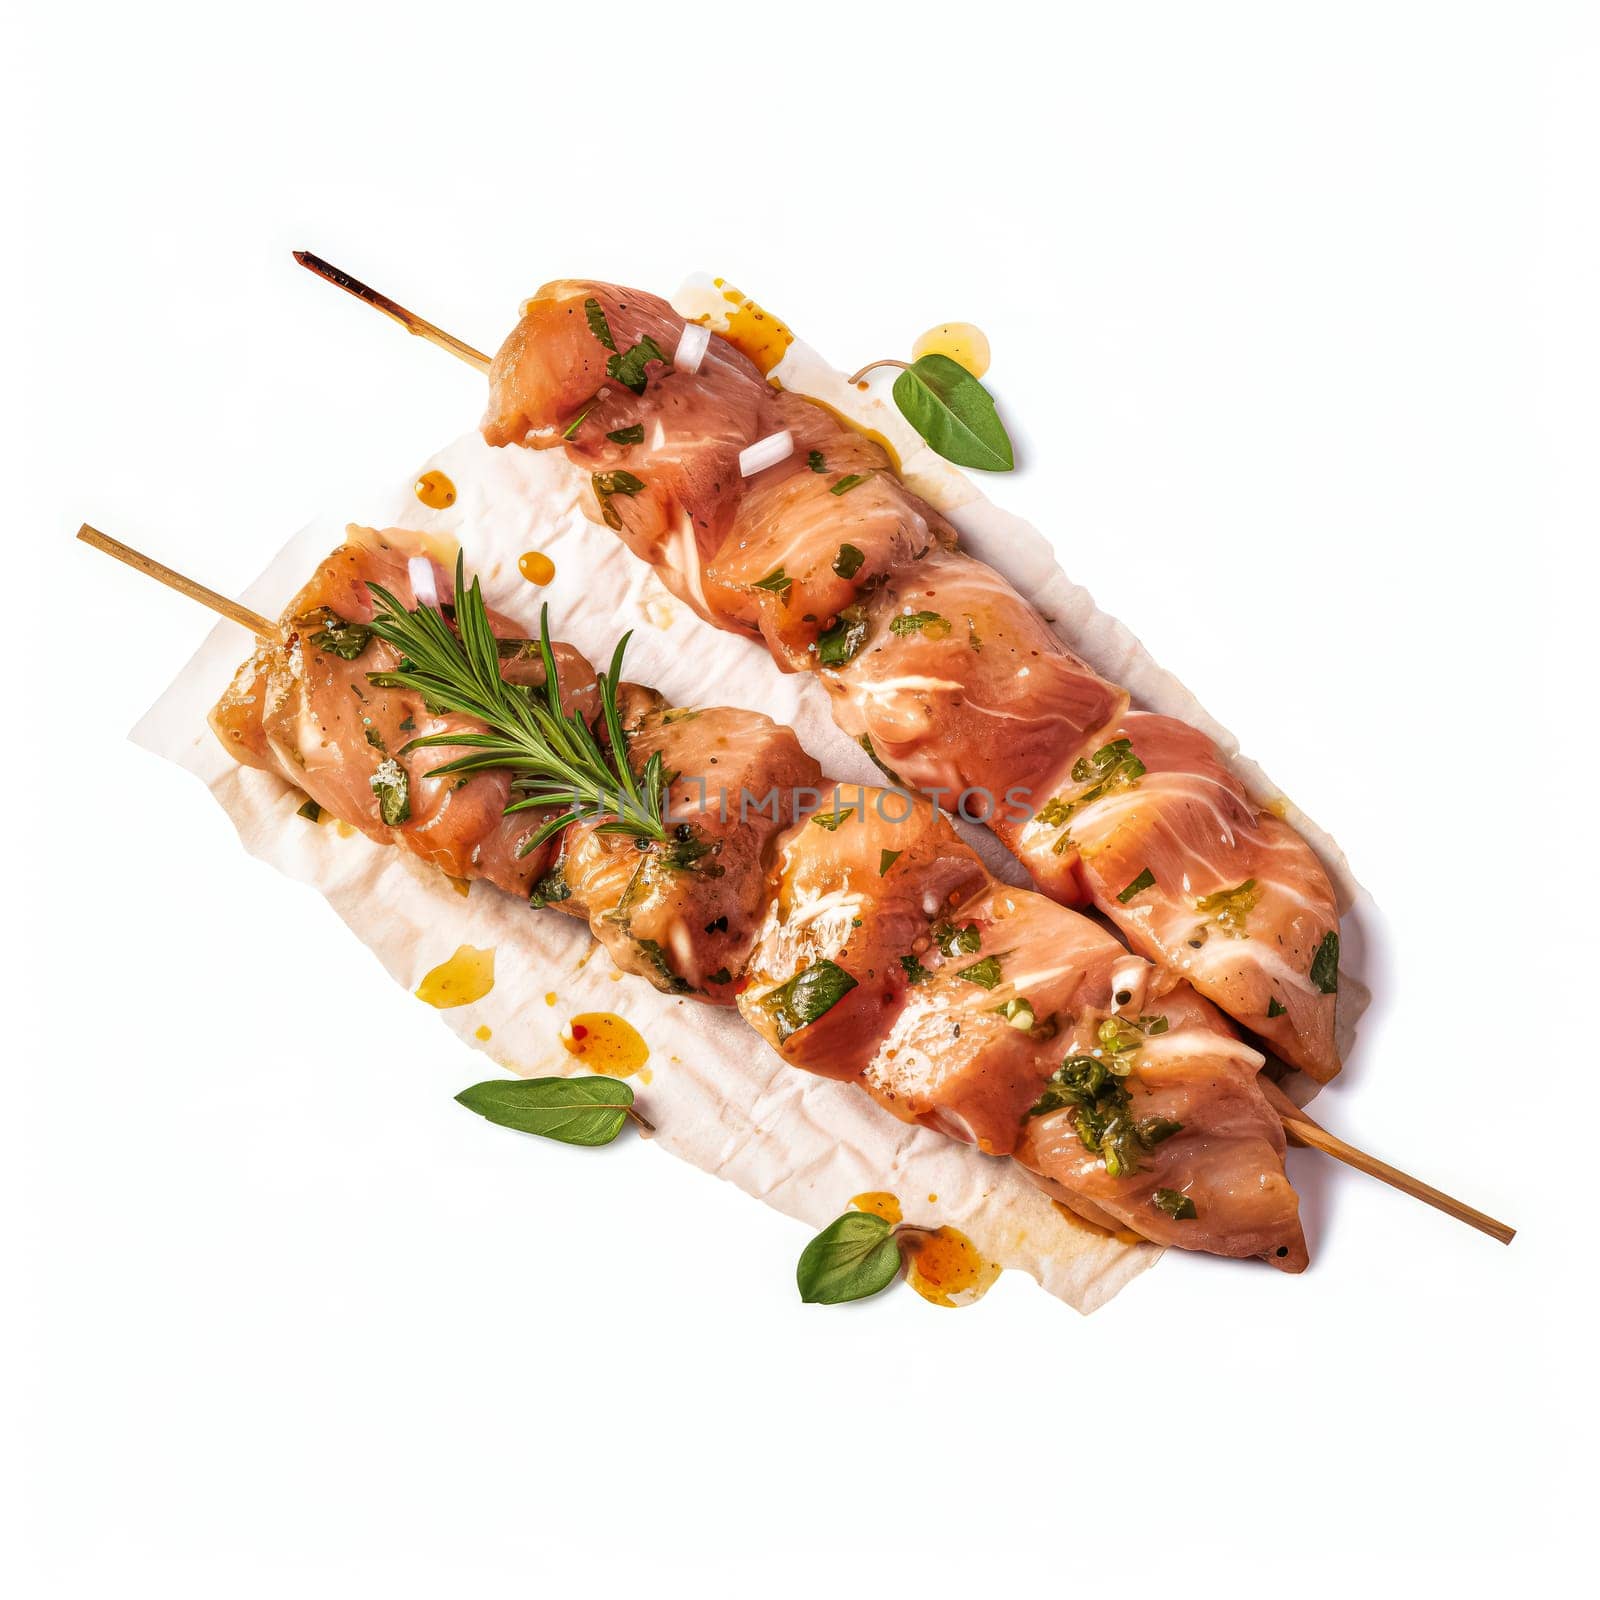 Savor the anticipation, Raw pork slices on skewers, expertly seasoned and ready for culinary mastery. White isolated background for a striking visual appeal